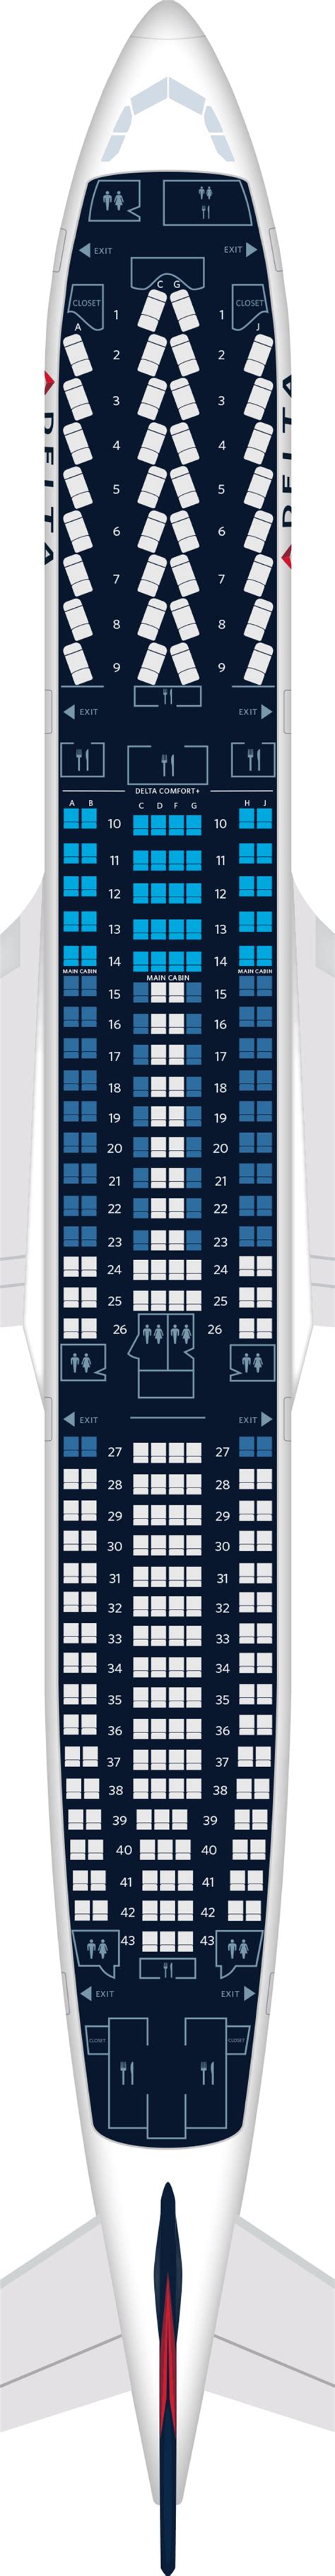 United Airbus A380 Seating Chart